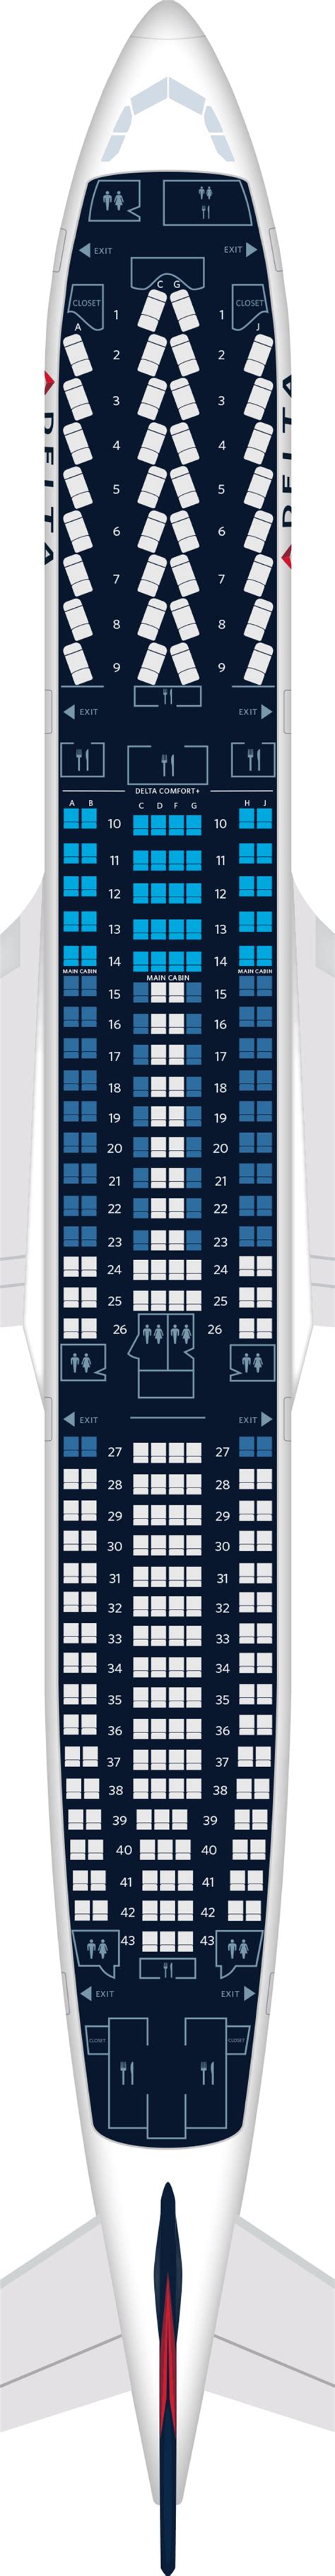 United Airbus A380 Seating Chart